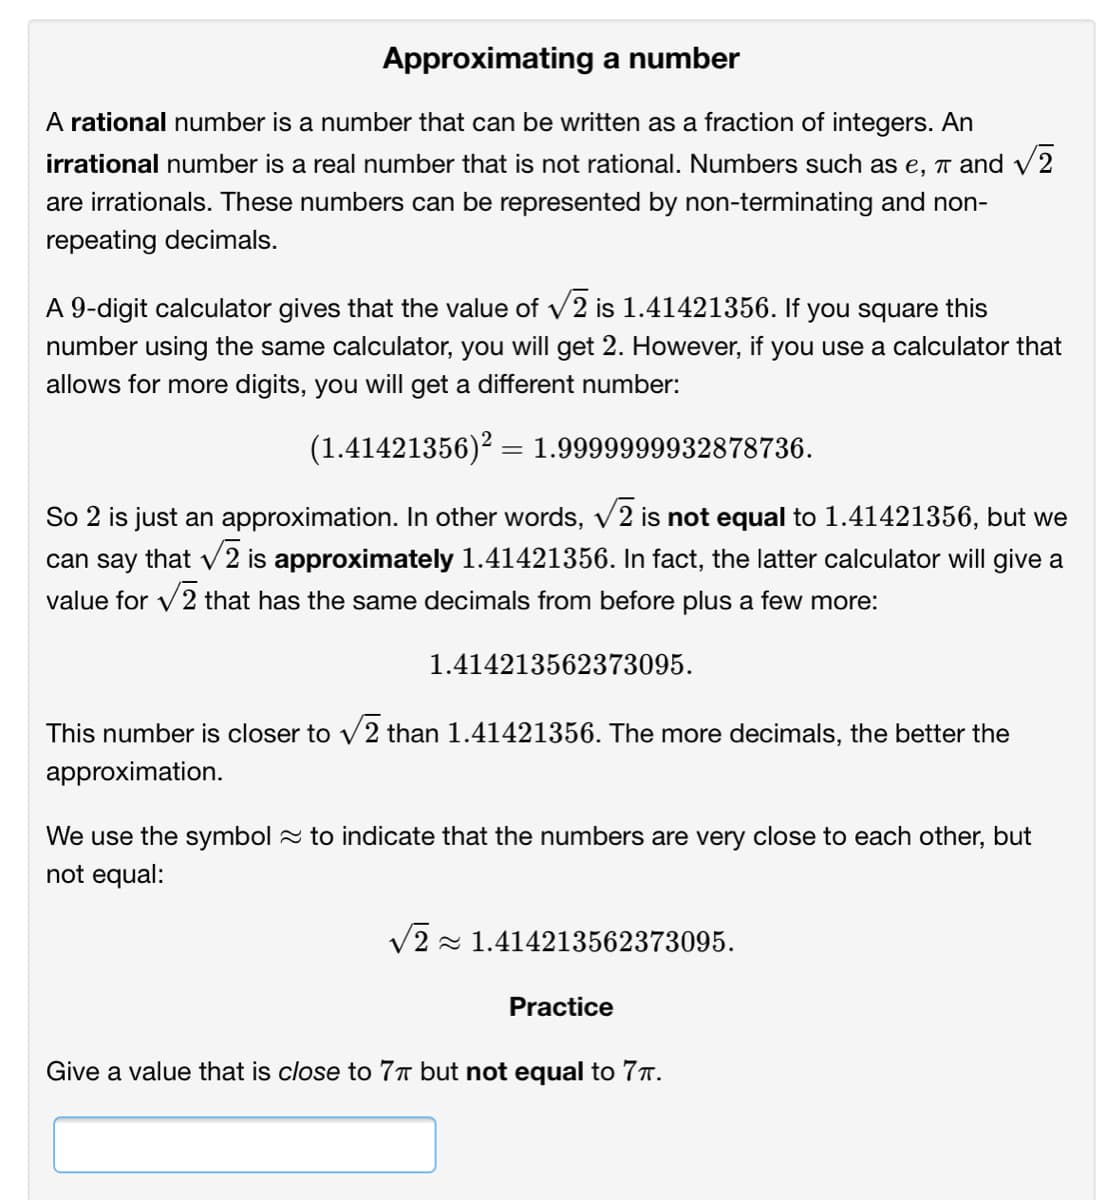 Approximating a number
A rational number is a number that can be written as a fraction of integers. An
irrational number is a real number that is not rational. Numbers such as e, 1 and v
V2
are irrationals. These numbers can be represented by non-terminating and non-
repeating decimals.
A 9-digit calculator gives that the value of v2 is 1.41421356. If you square this
V
number using the same calculator, you will get 2. However, if you use a calculator that
allows for more digits, you will get a different number:
(1.41421356)? = 1.9999999932878736.
So 2 is just an approximation. In other words, v2 is not equal to 1.41421356, but we
can say that v2 is approximately 1.41421356. In fact, the latter calculator will give a
V
value for v2 that has the same decimals from before plus a few more:
1.414213562373095.
This number is closer to v2 than 1.41421356. The more decimals, the better the
approximation.
We use the symbol 2 to indicate that the numbers are very close to each other, but
not equal:
V2 - 1.414213562373095.
Practice
Give a value that is close to 77 but not equal to 77.
